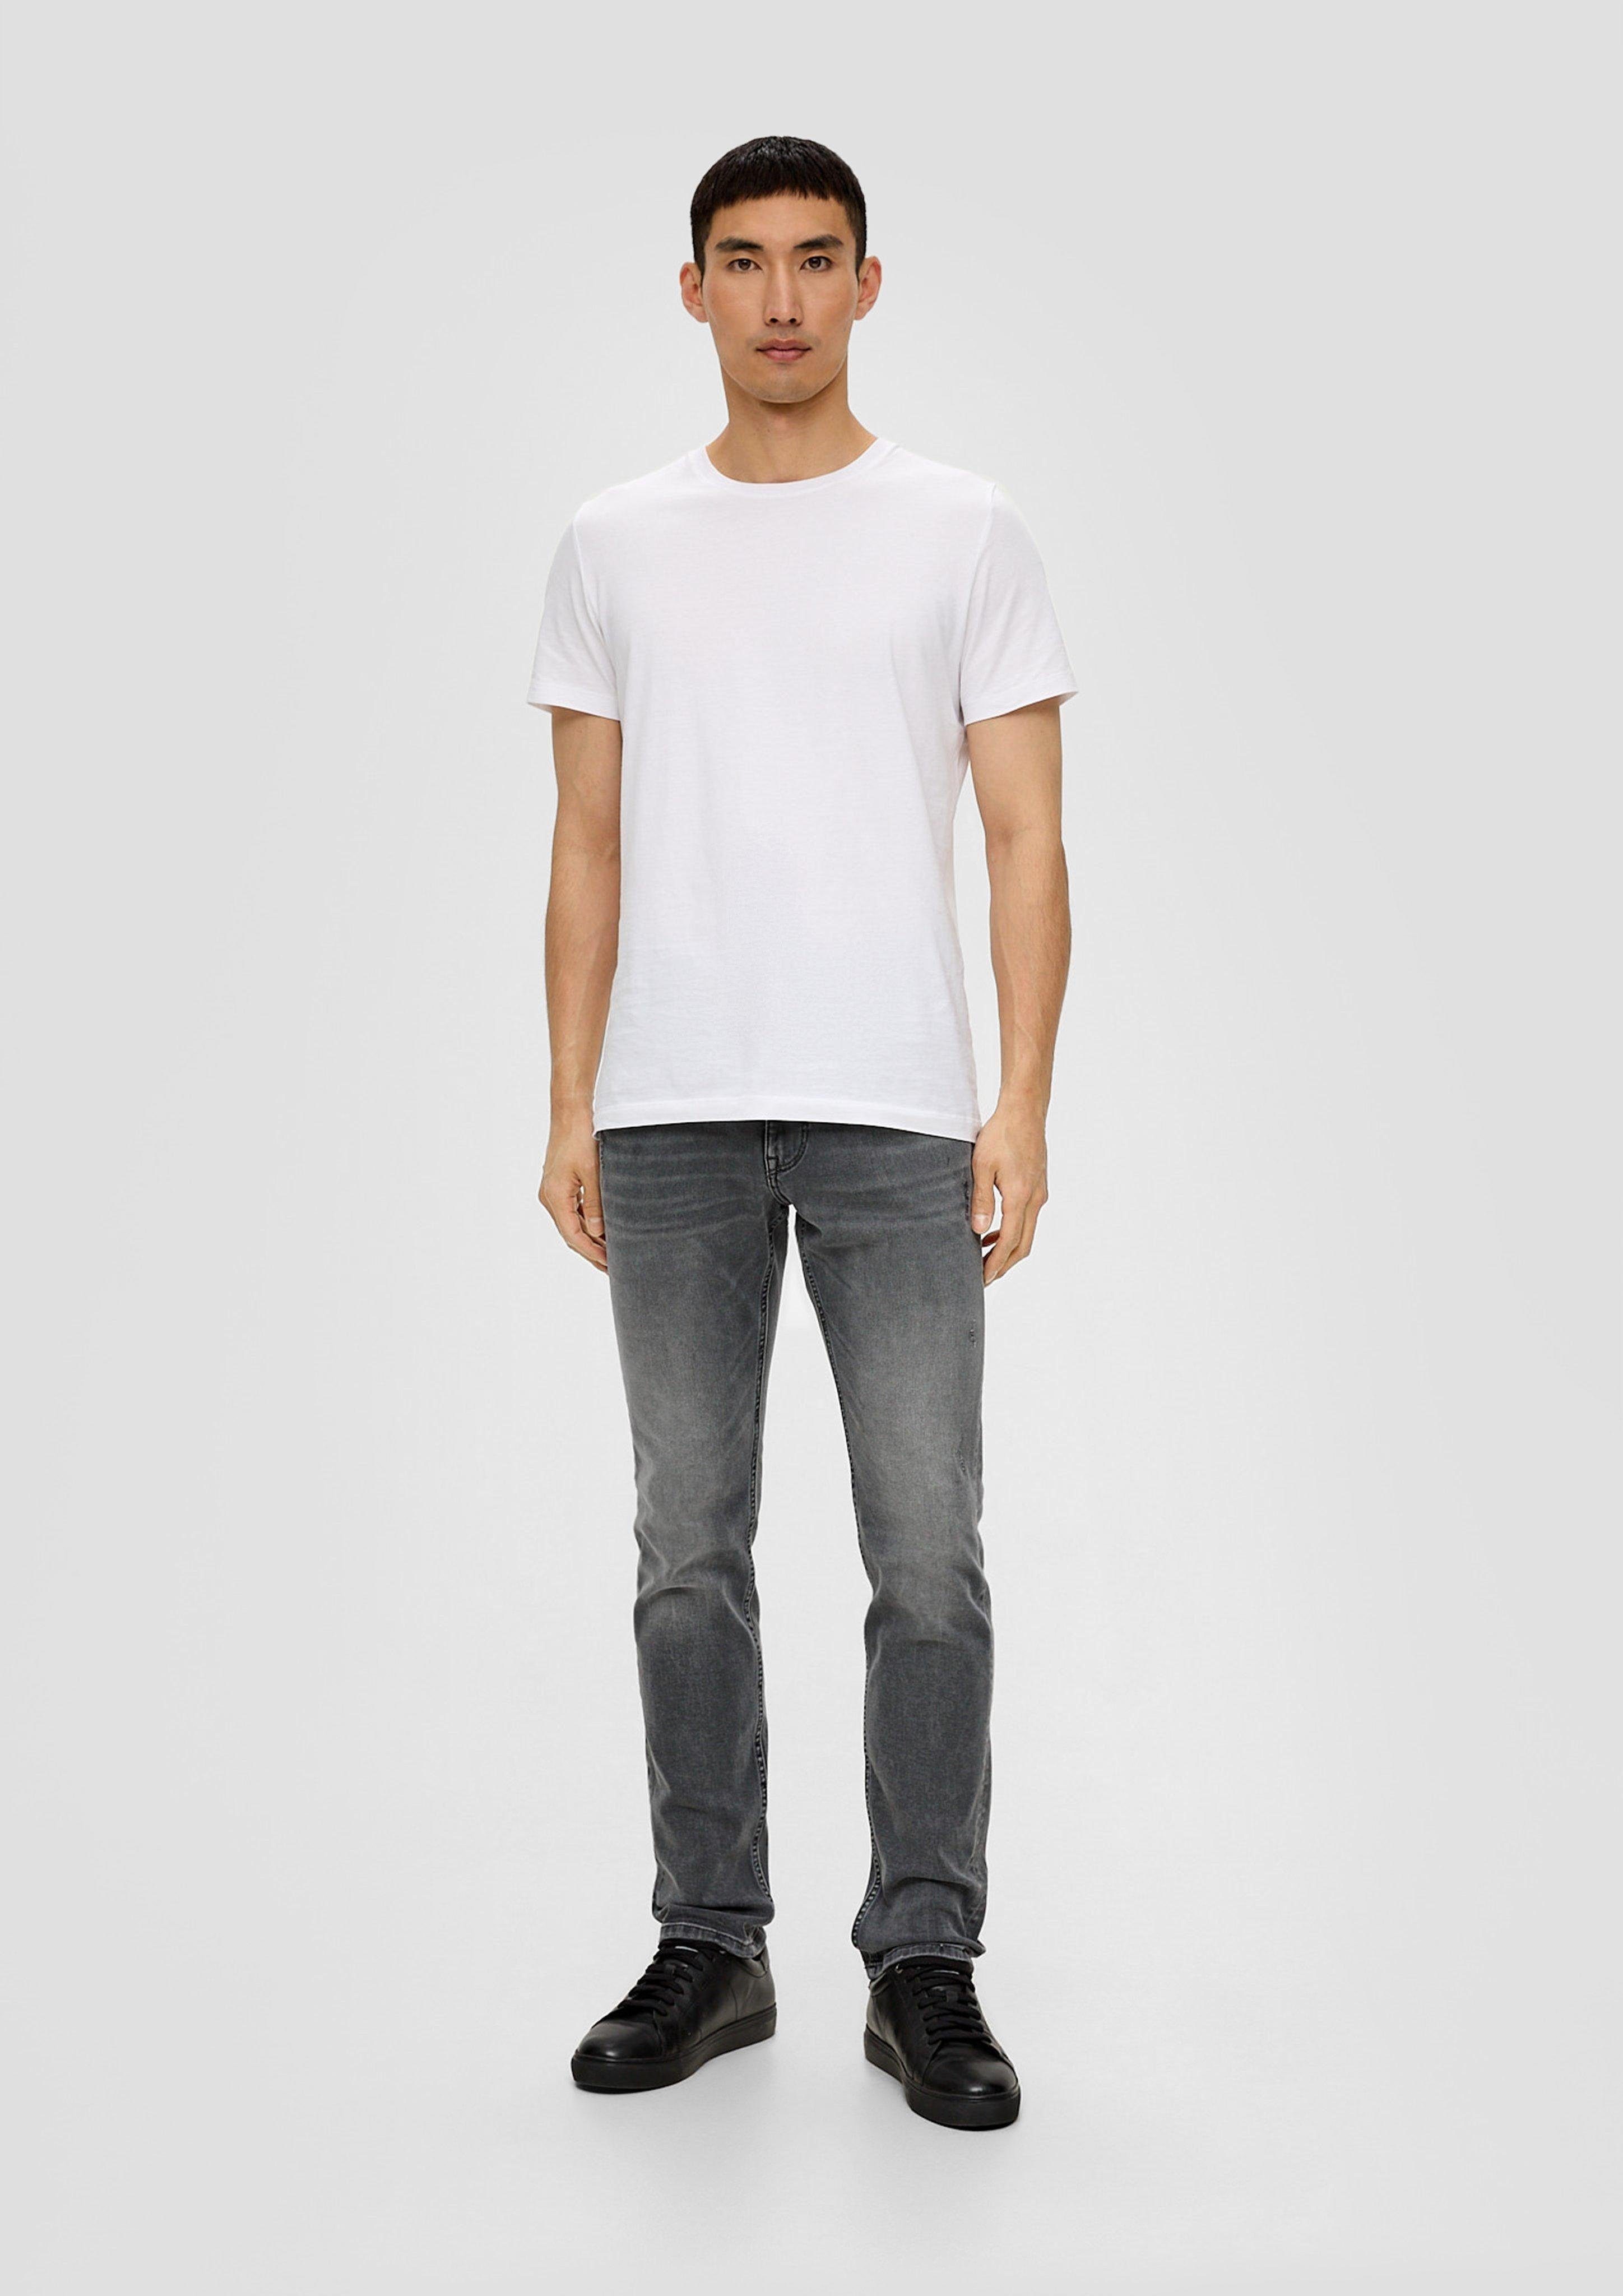 s.Oliver Mid Leder-Patch / Leg Straight Fit / Keith Slim / Rise Waschung, Stoffhose Jeans